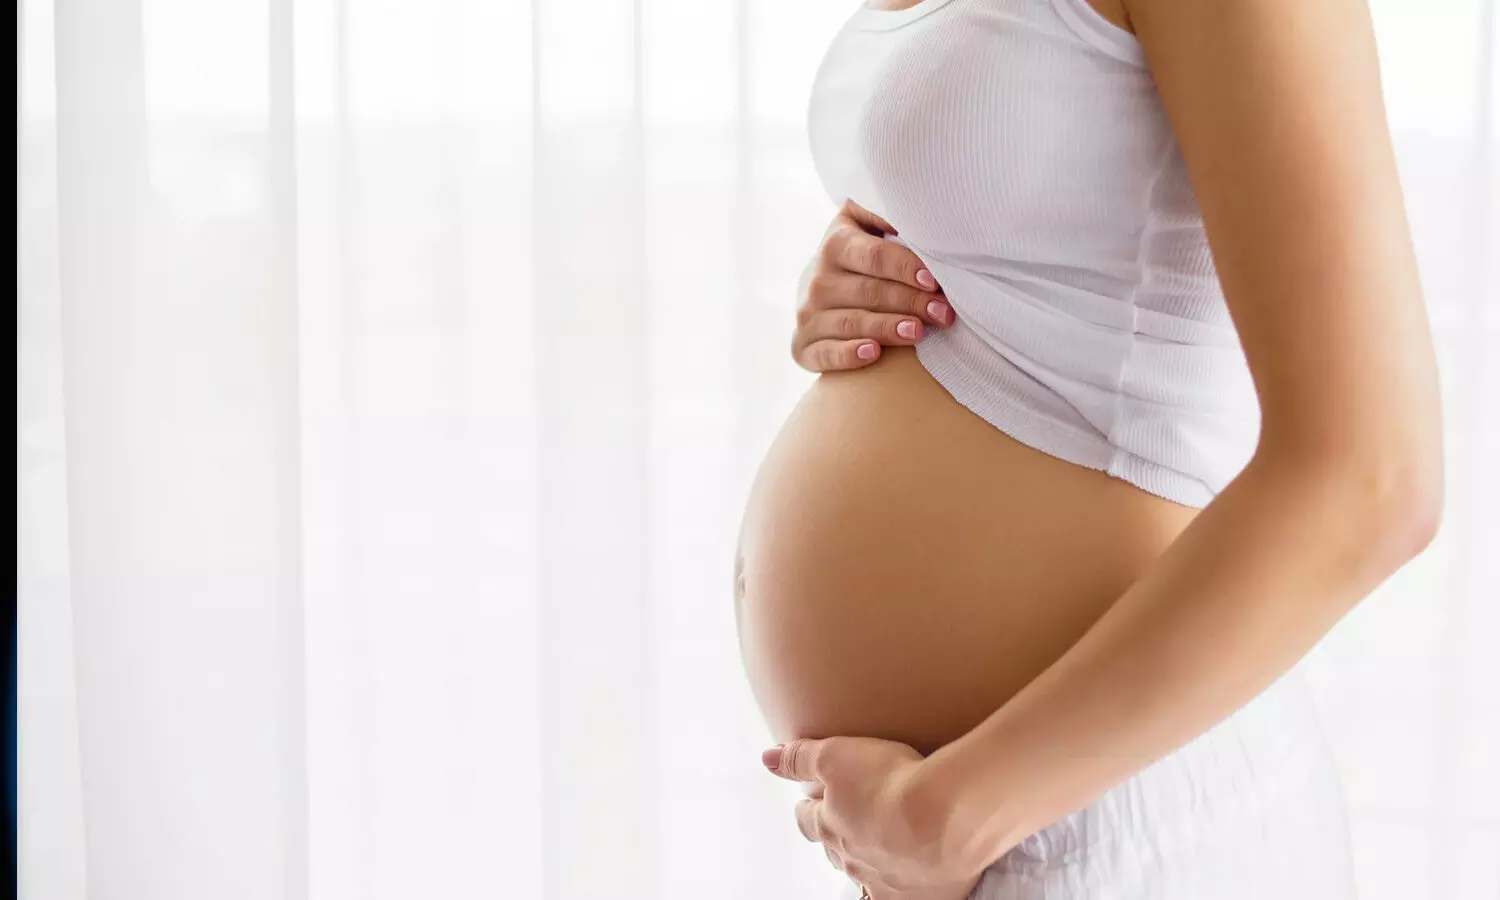 COVID-19 can be transmitted in the womb, reports pediatric infectious disease journal